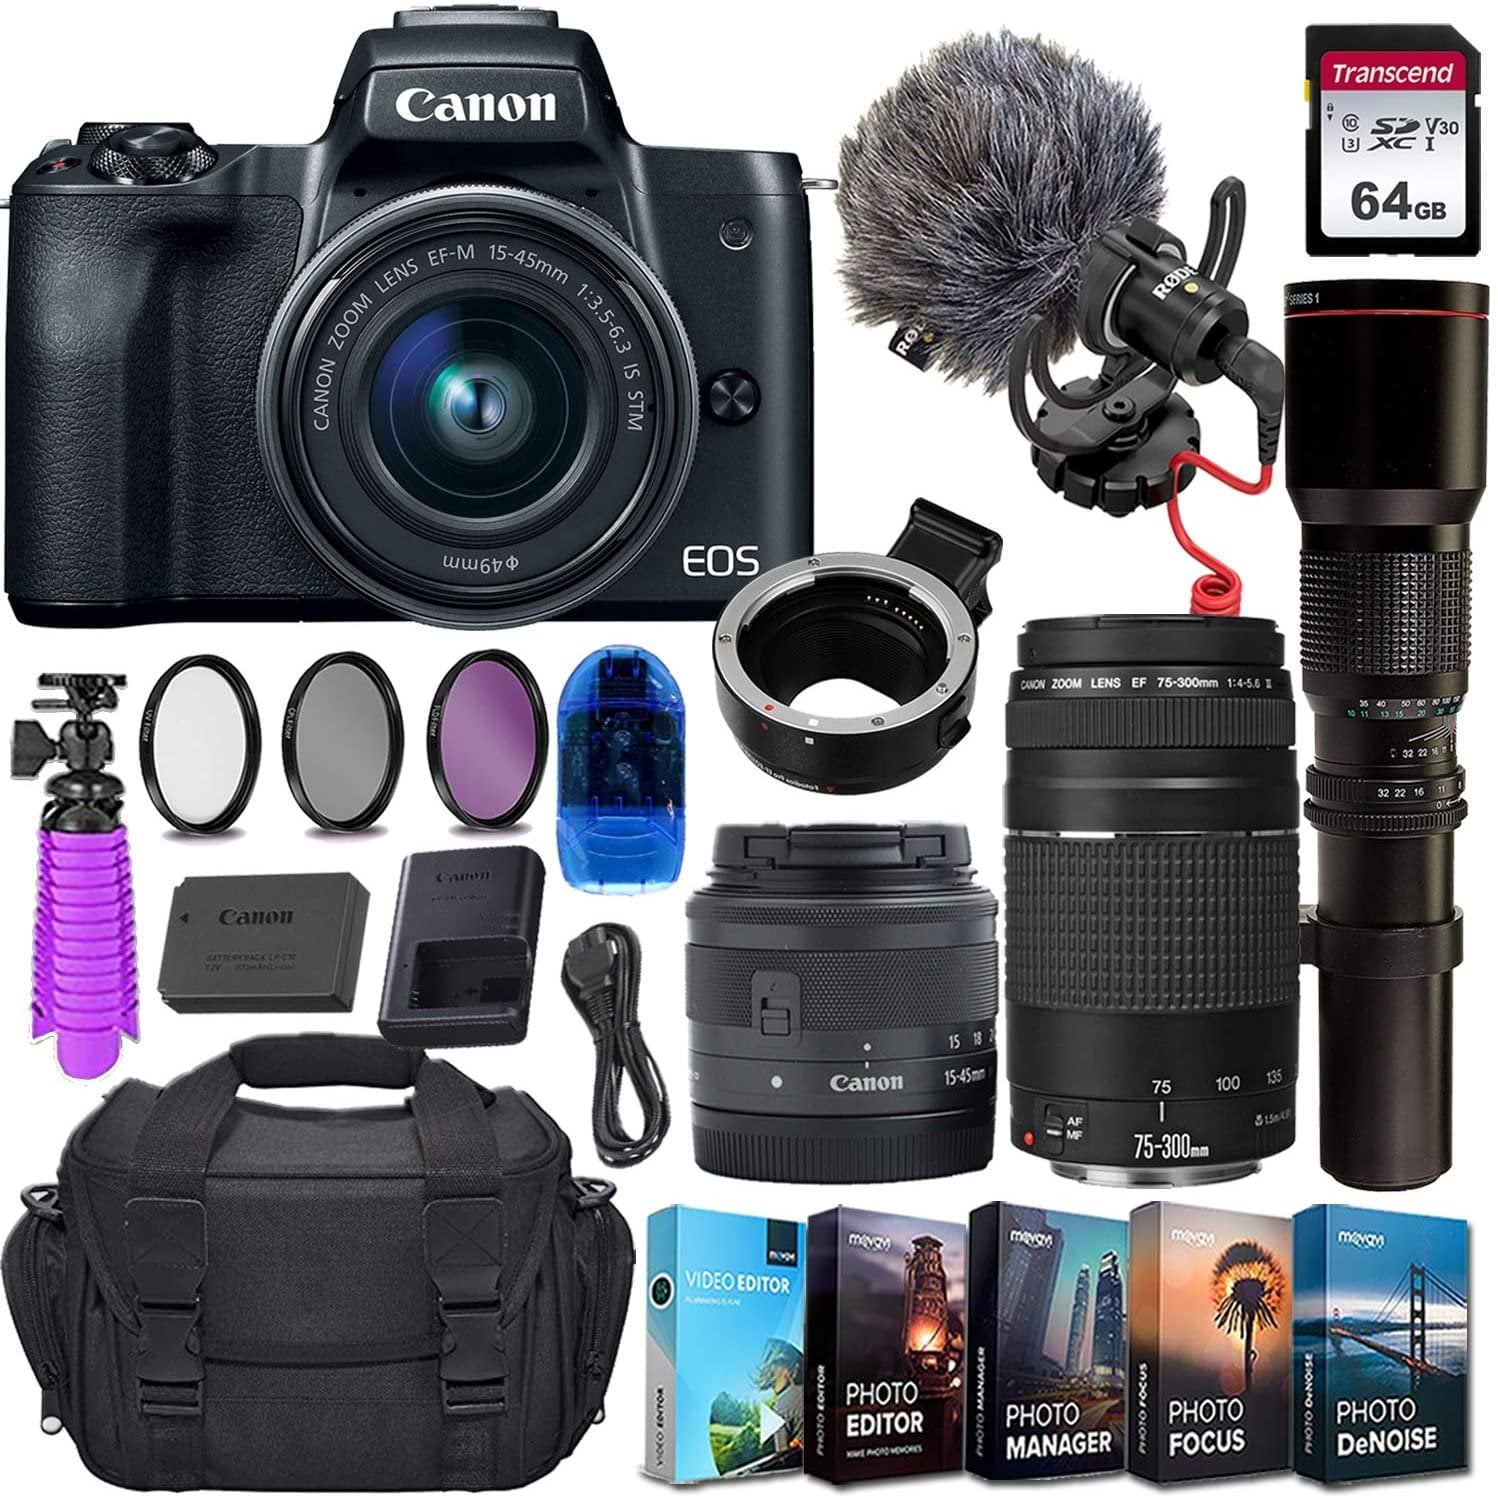 Nikon D500 20.9MP DSLR Camera (Body Only) 1559 Pro Bundle with Extra  Battery and Charger, Sandisk Ultra 32GB SD, Gadget Bag, Tripod, HDMI Cable  and More 